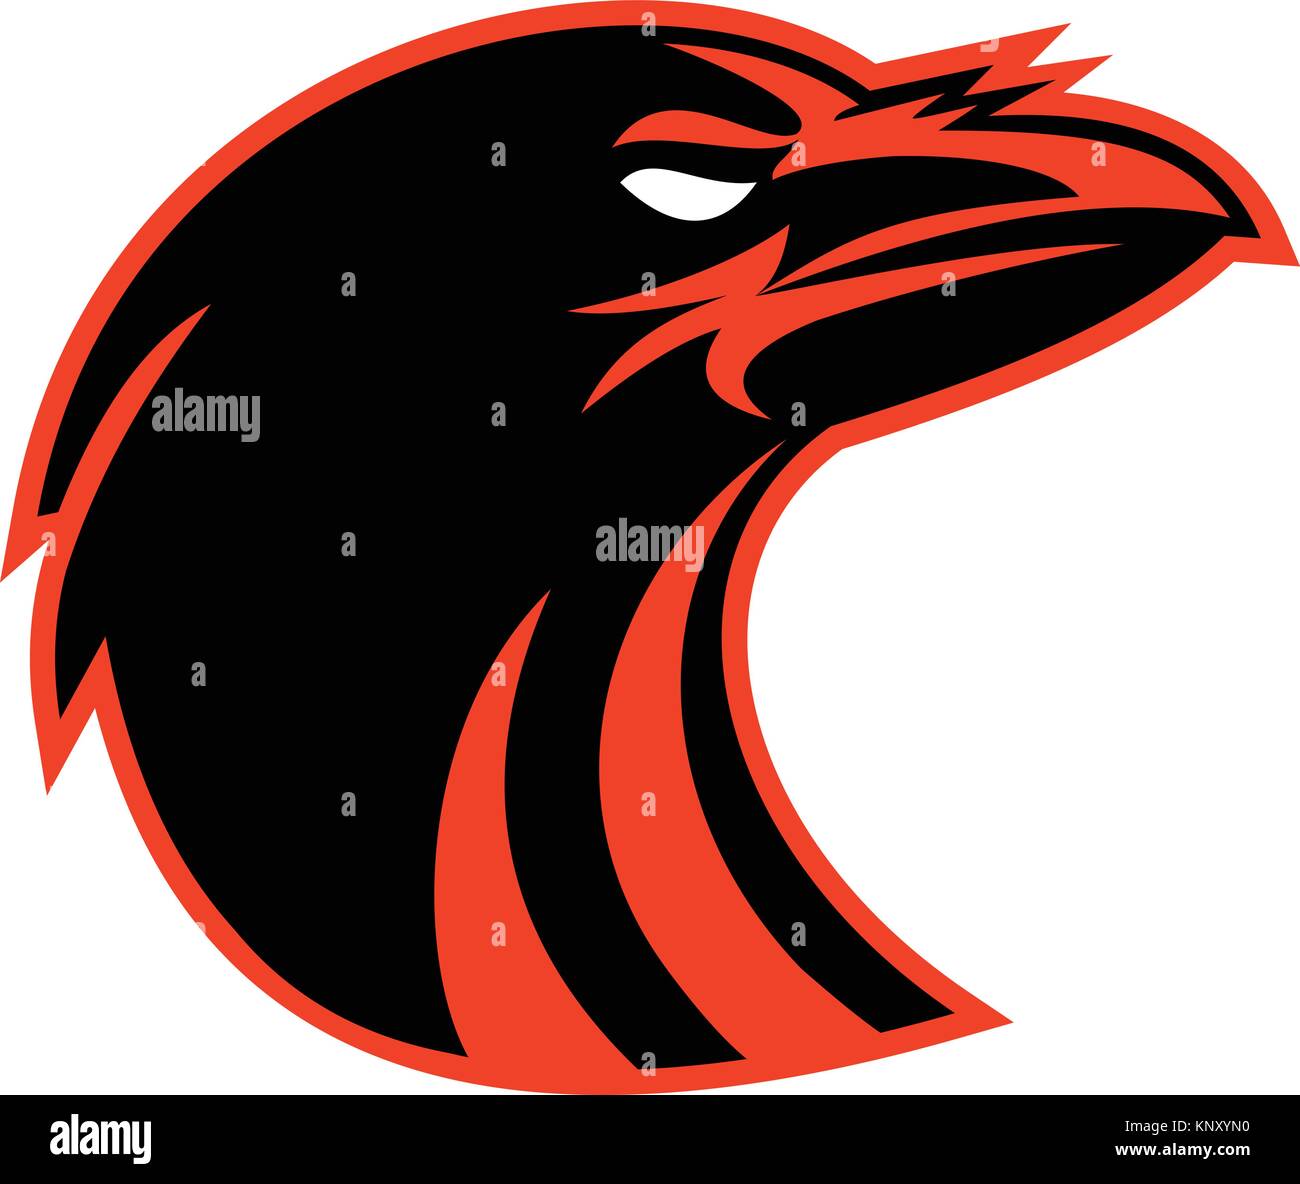 Icon style illustration of an angry raven or crow head looking up on isolated background. Stock Vector